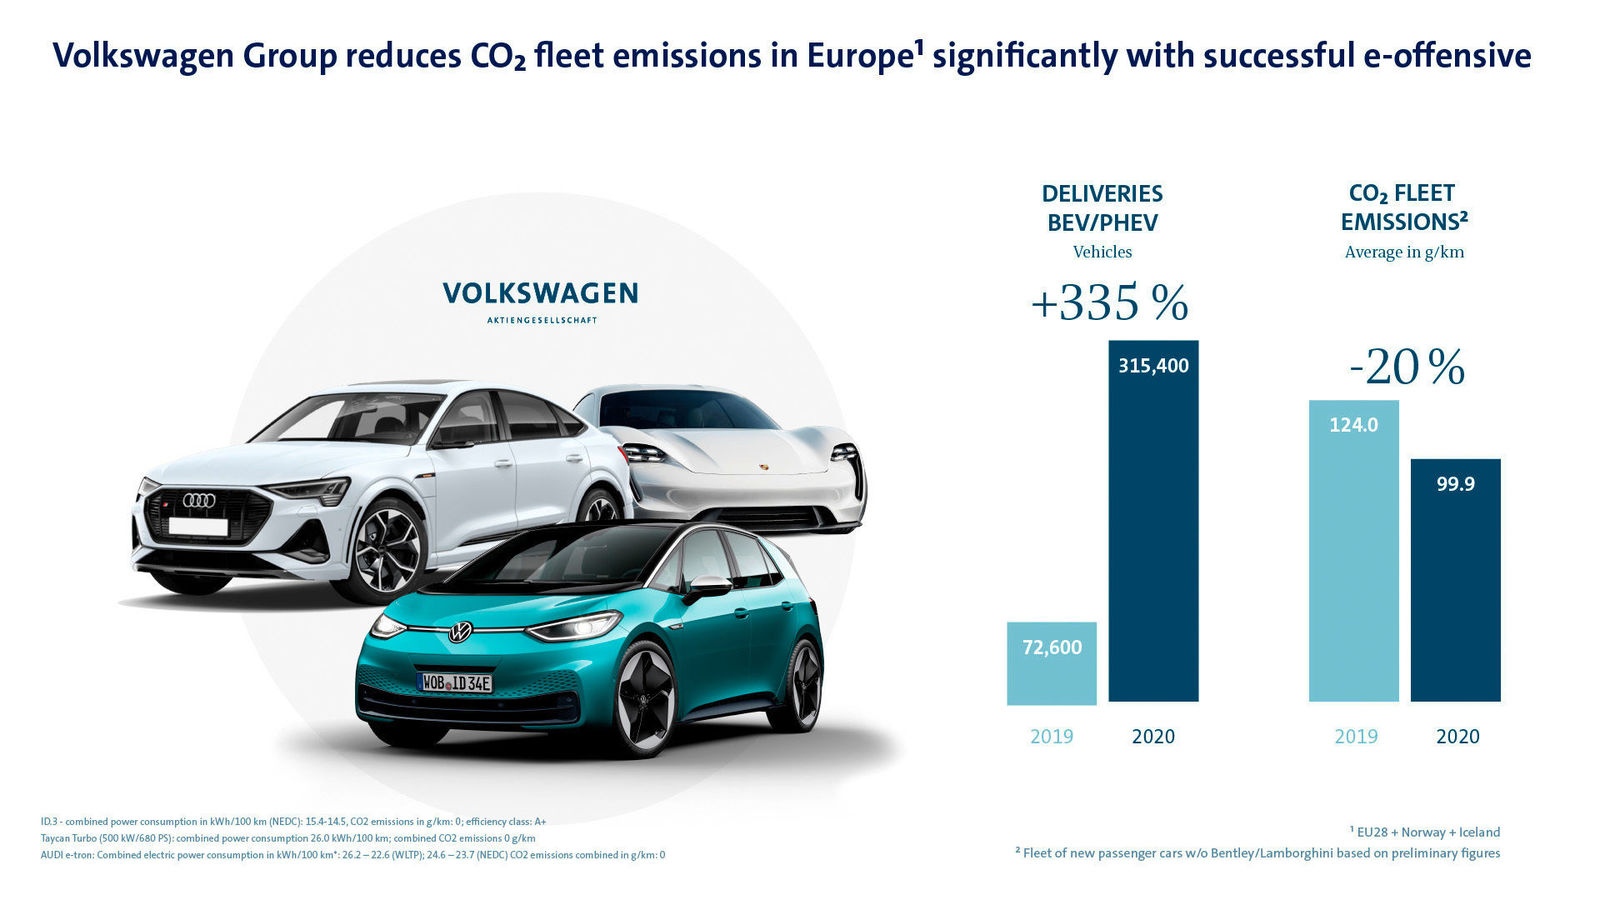 E-offensive gains traction: Volkswagen Group significantly reduces CO2 fleet average in the EU